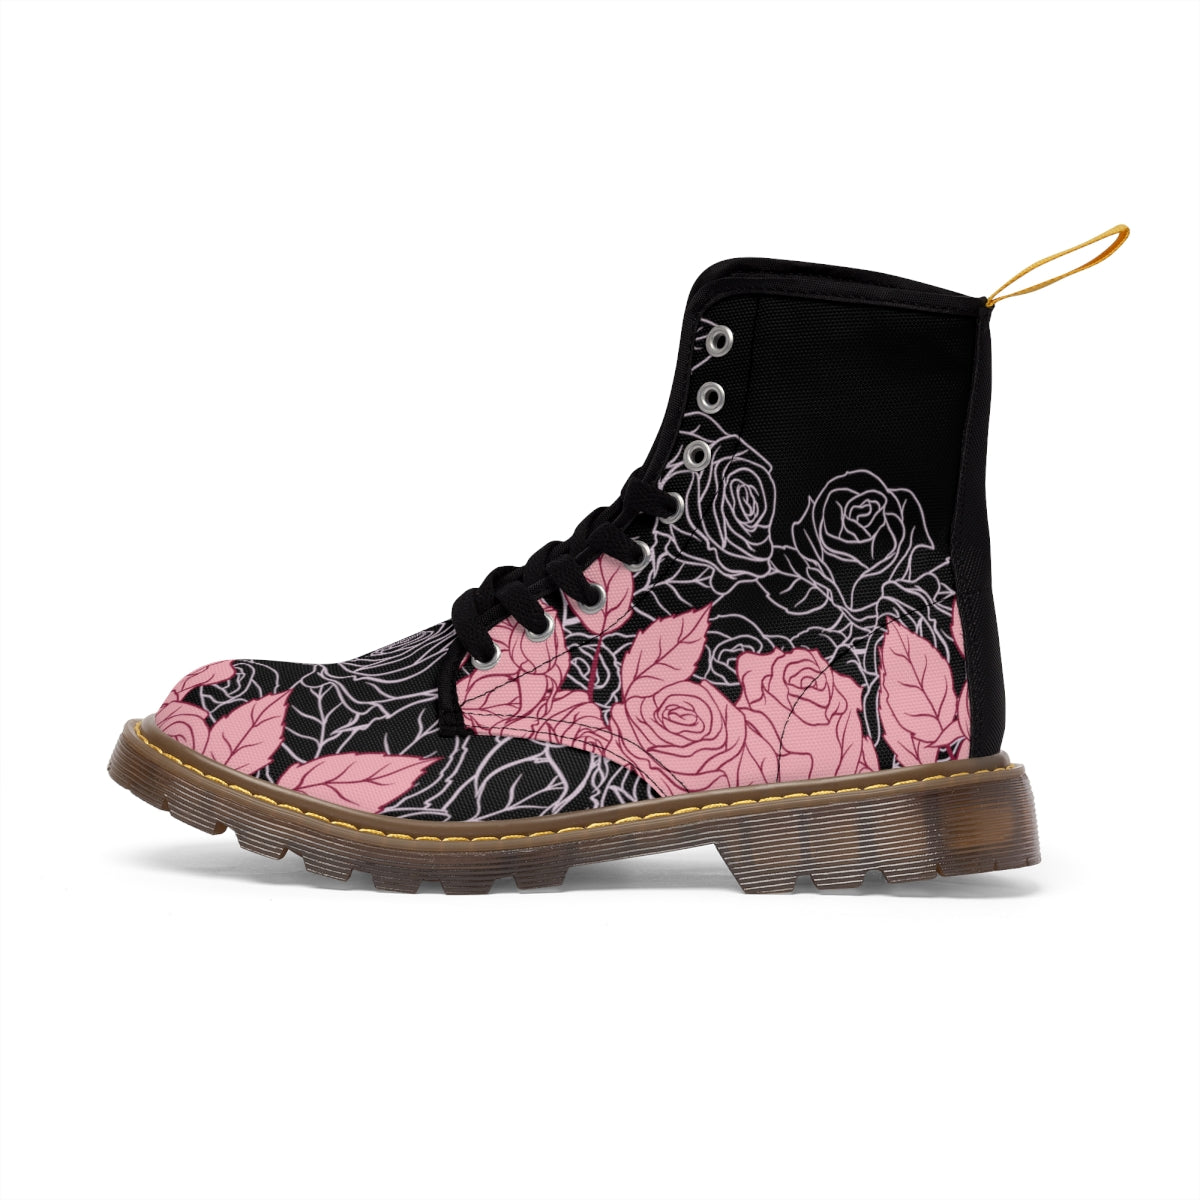 ARTZIRA PINK FLORAL WOMEN'S CANVAS BOOTS, LIVE ARTISTICALLY WITH THIS FEMININE FLORAL HIGH TOP RUBBER SOLE BOOTS BLACK